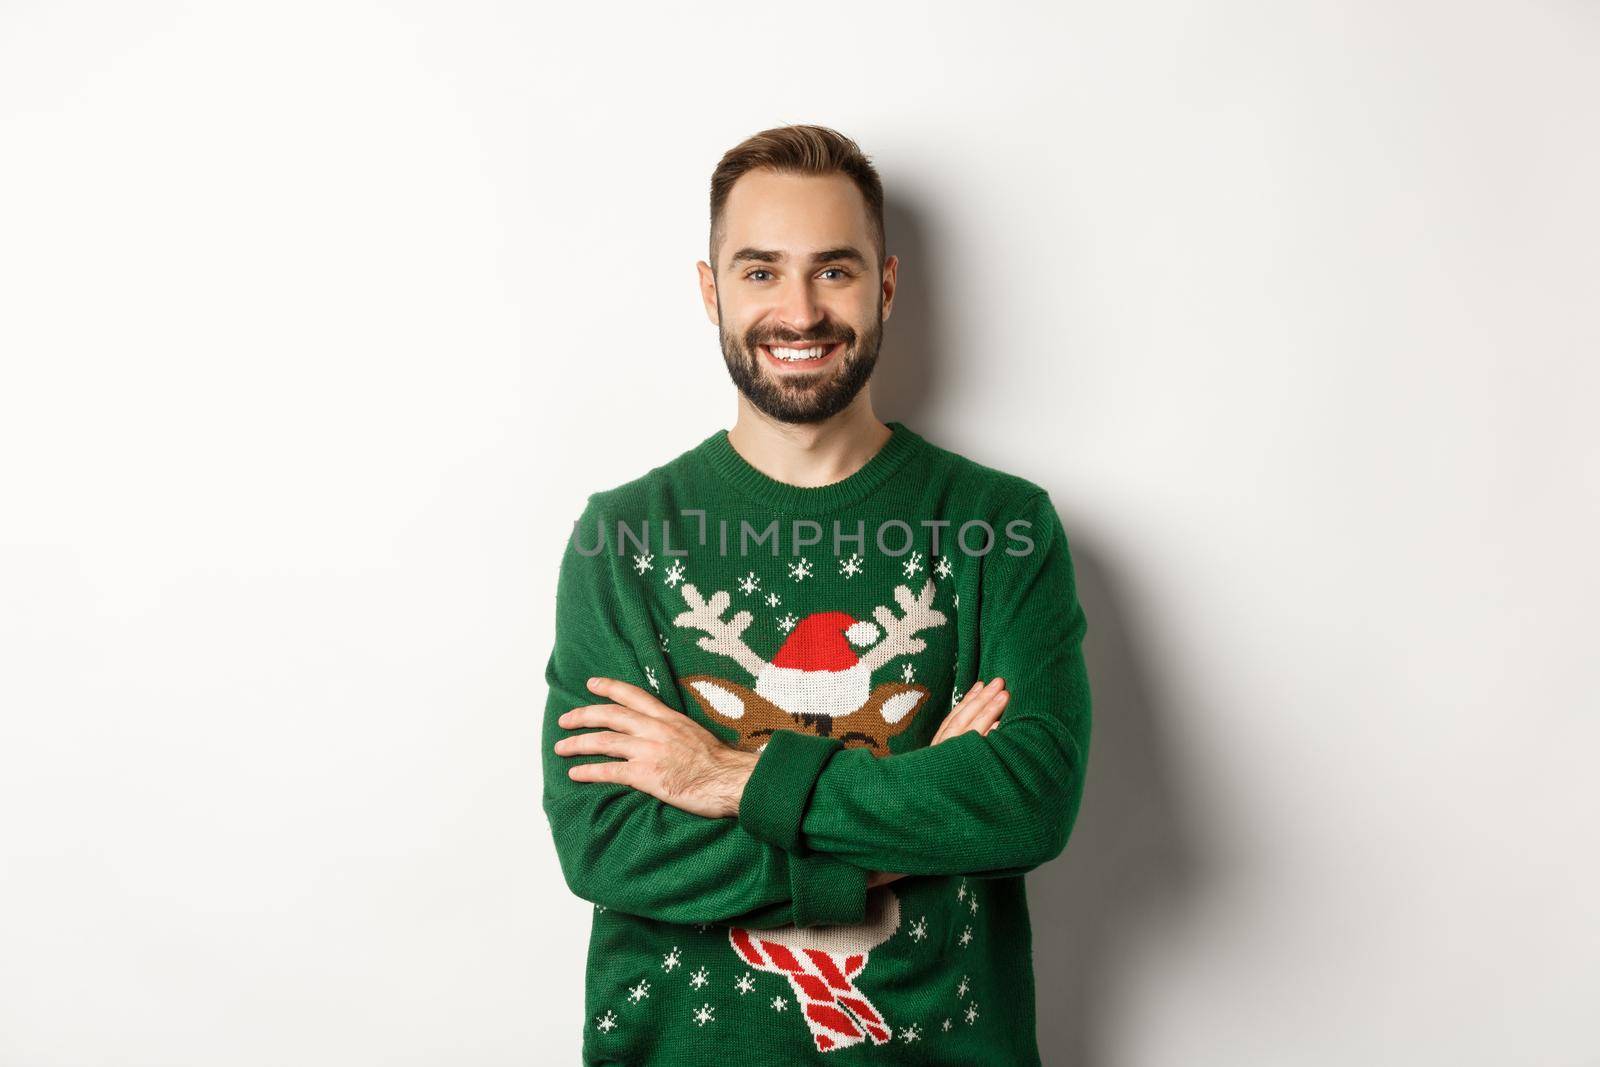 New Year party and winter holidays concept. Happy bearded man in funny christmas sweater standing against white background.